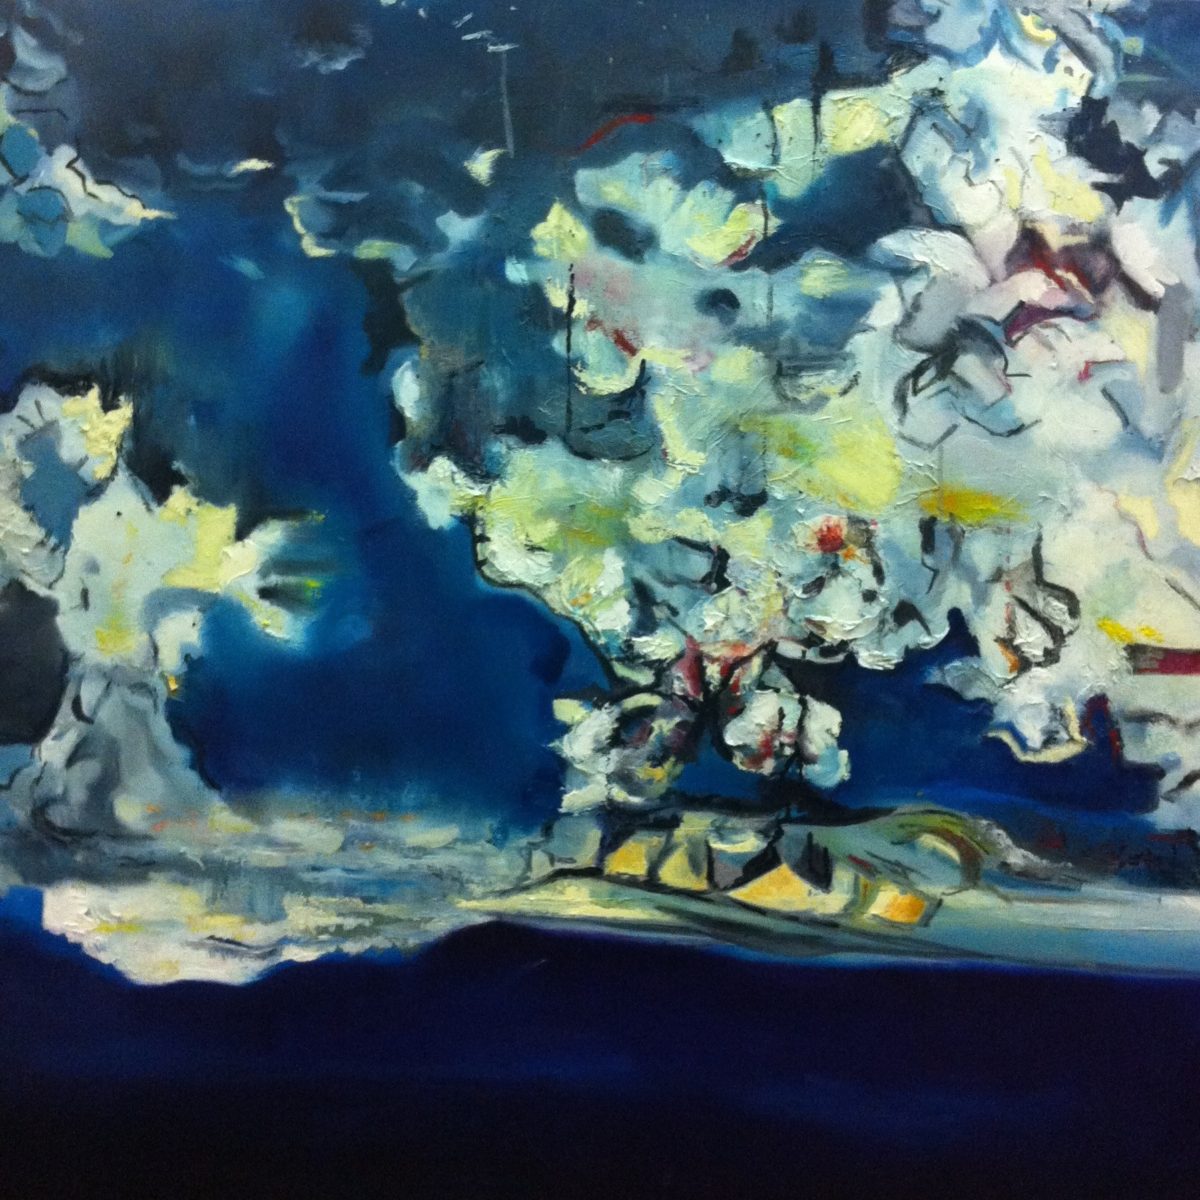 Image of clouds painted by artist Helen McNulty as a visual meditation of the poem Clouds by Wislawa Szymborska